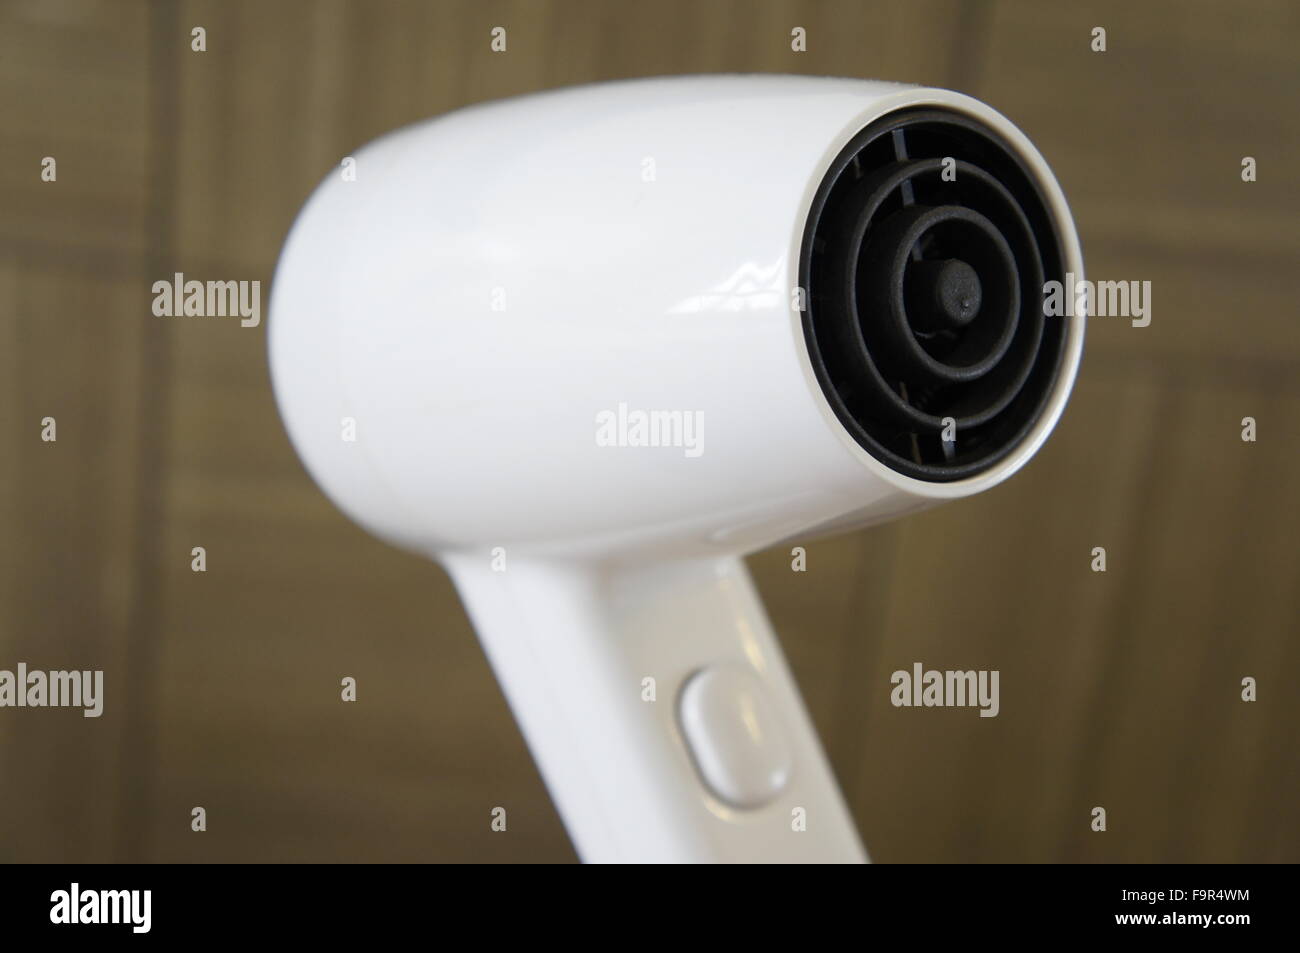 hair dryer close up Stock Photo